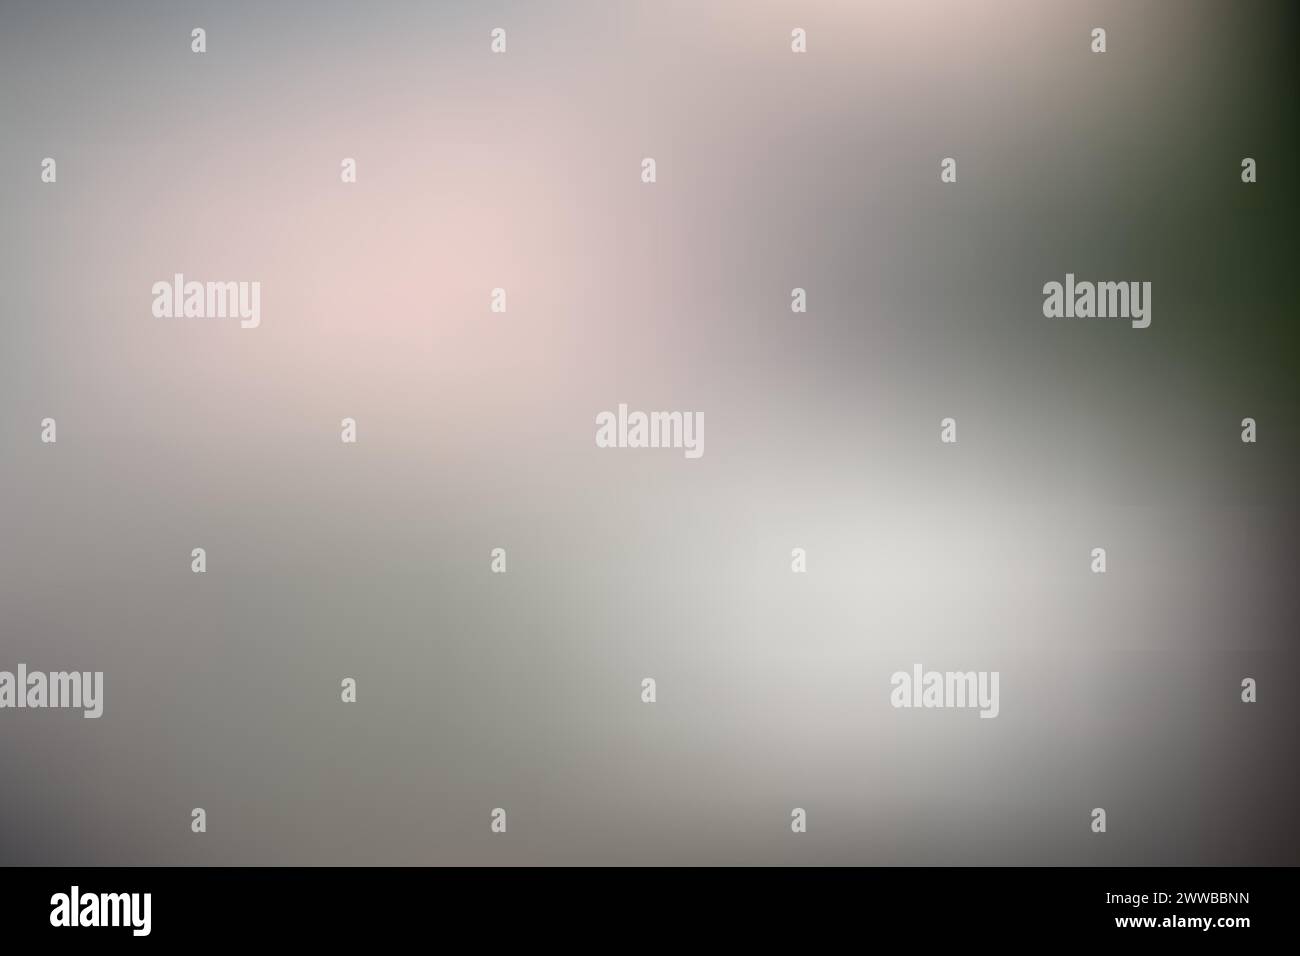 gradient Wallpaper, Background, Flyer or Cover Design for Your Business with Abstract Blurred Texture - Applicable for Reports, Presentations, Placard Stock Vector